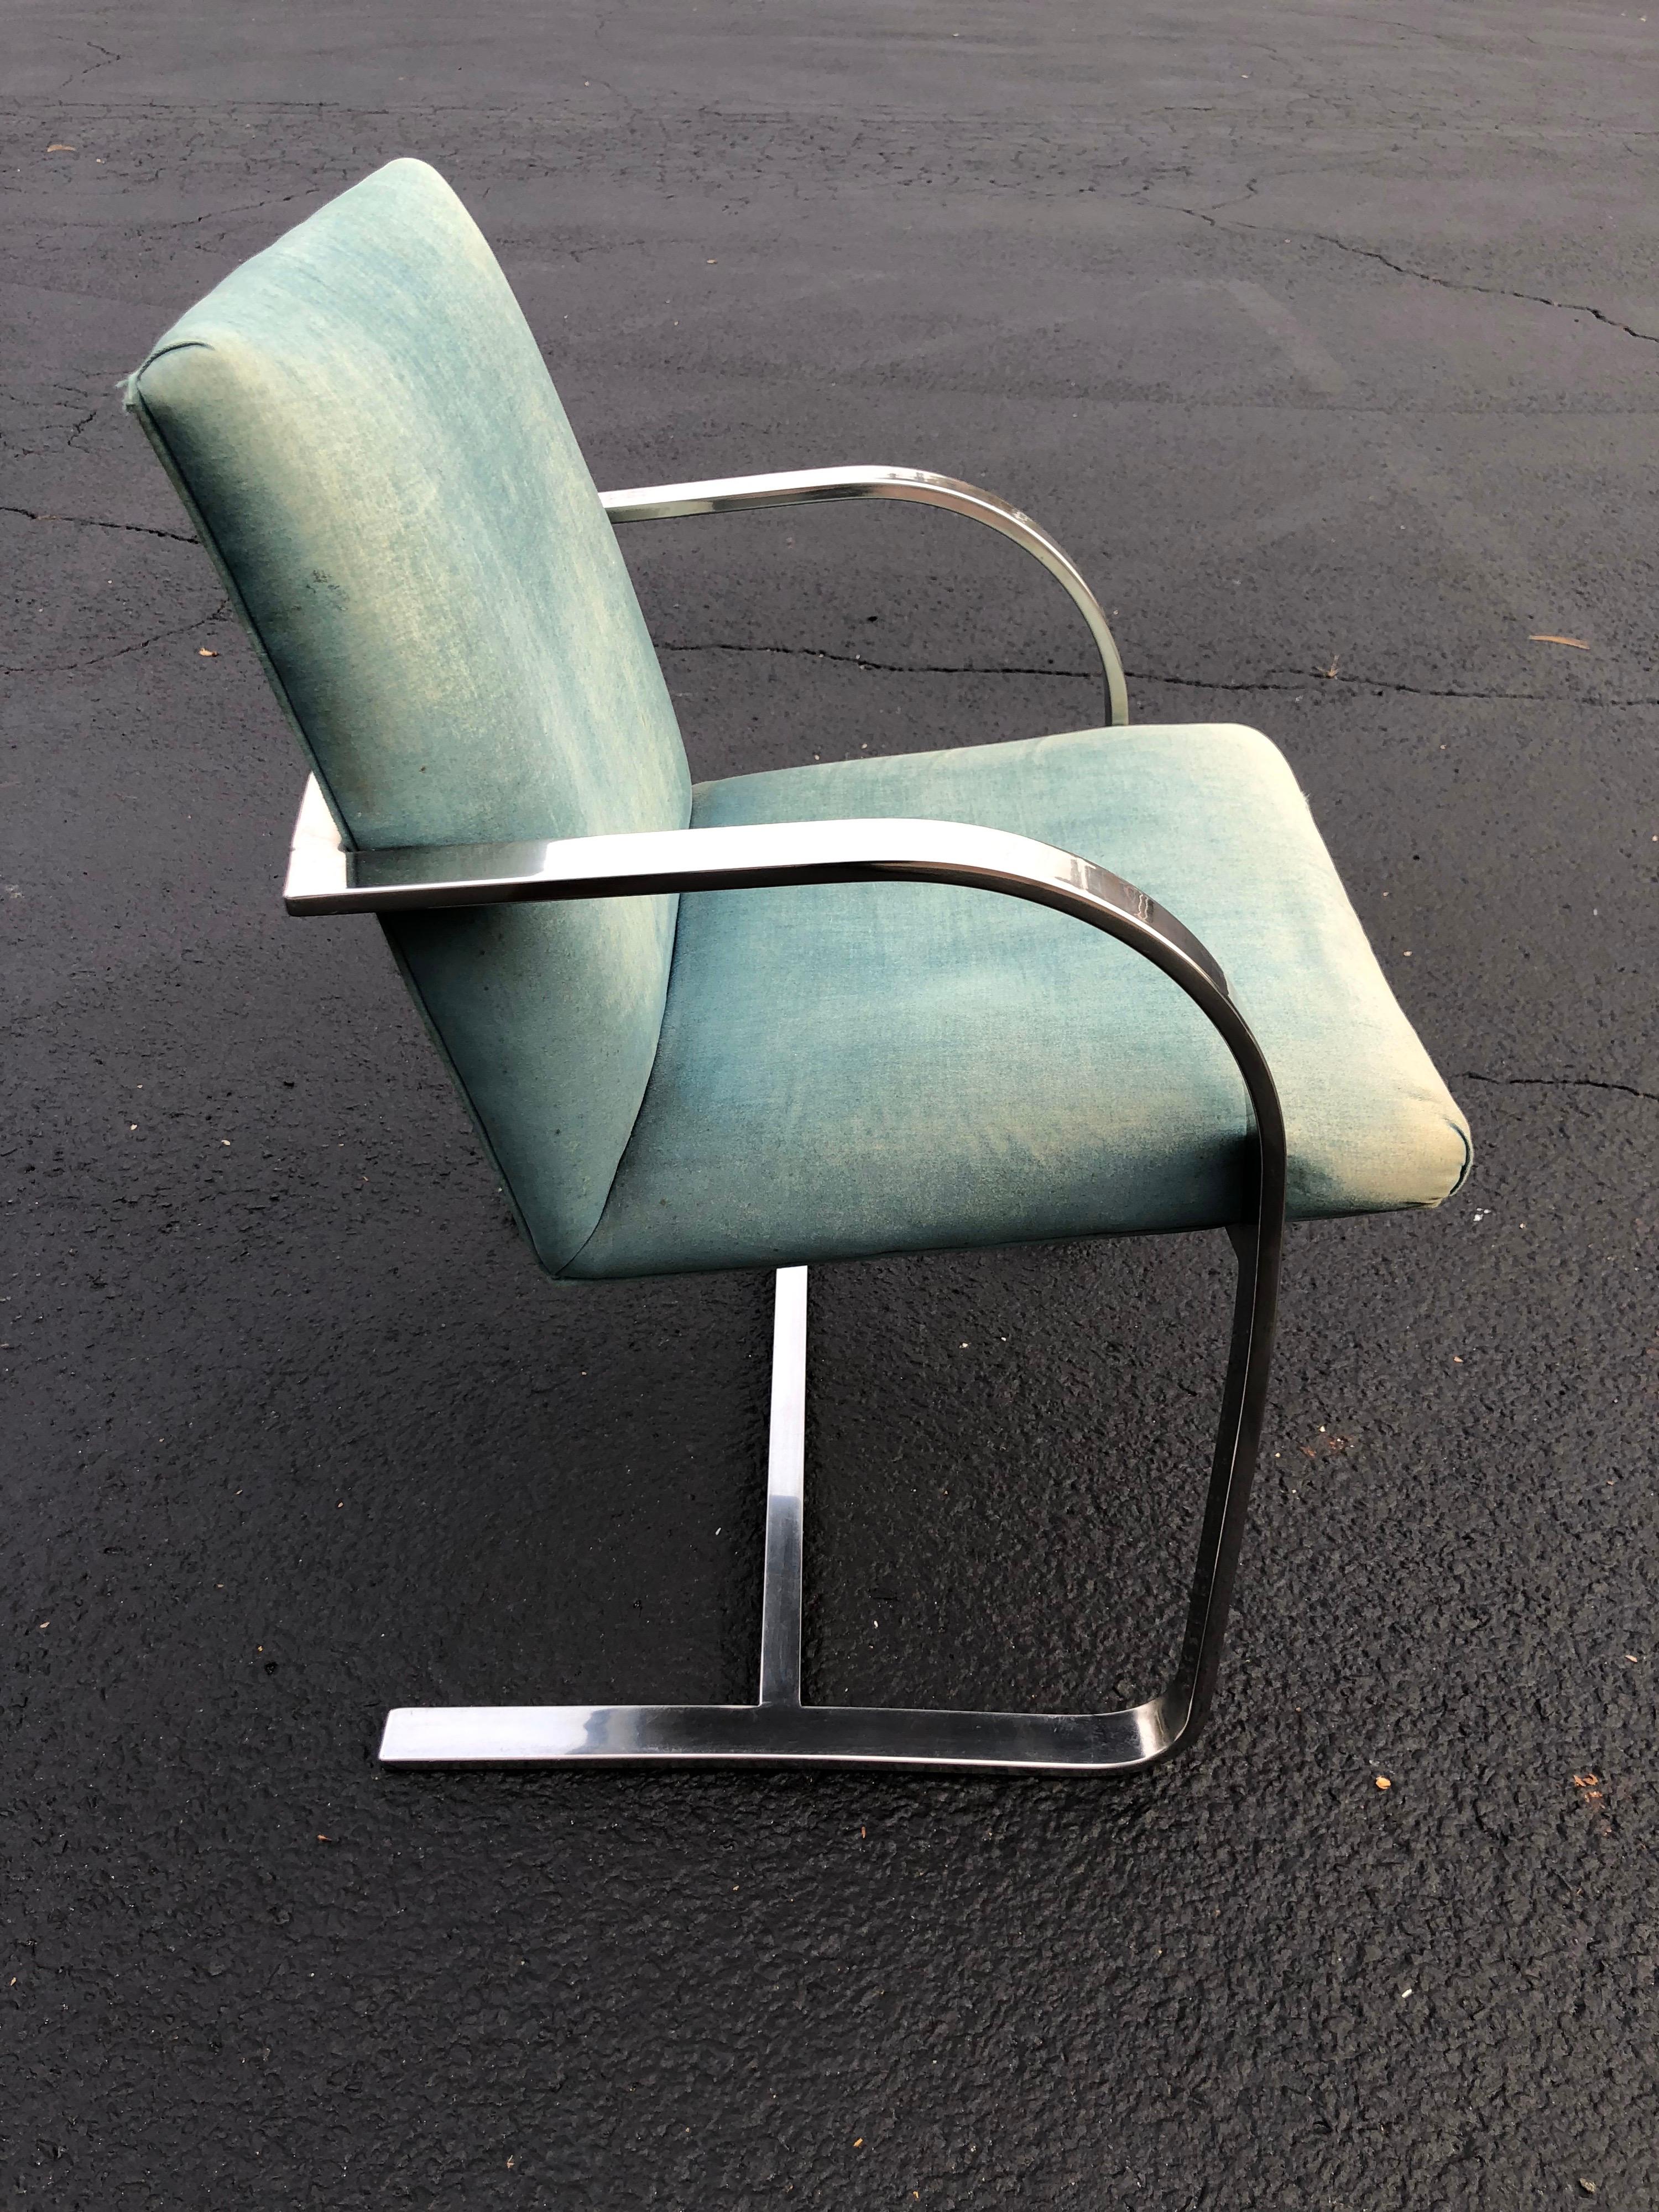 Flat bar Brno style chair .In the style of Ludwig Mies van der Rohe for Knoll. Light eggshell blue upholstery in need of recovering. Classic lines make up this beauty. Use for office or dining.
Arm height is 24.50